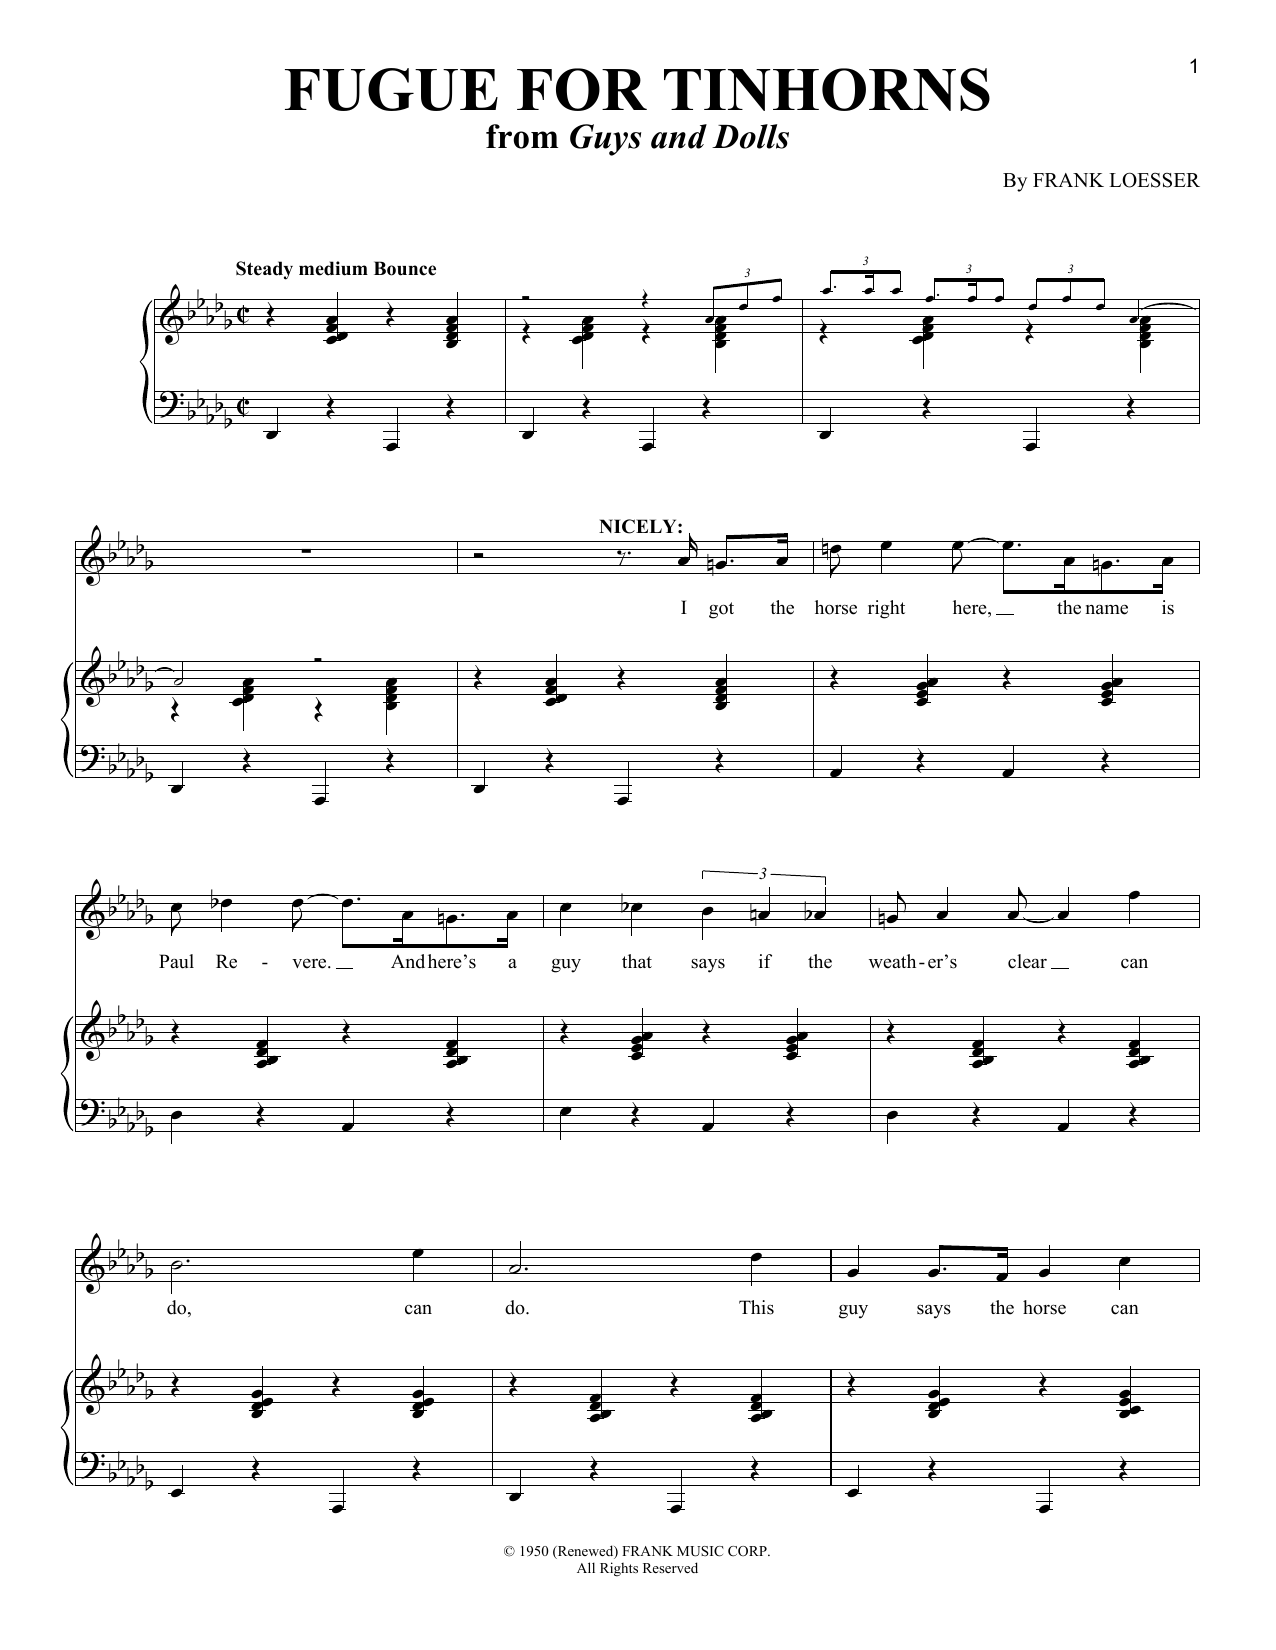 Download Frank Loesser Fugue For Tinhorns sheet music and printable PDF score & Broadway music notes